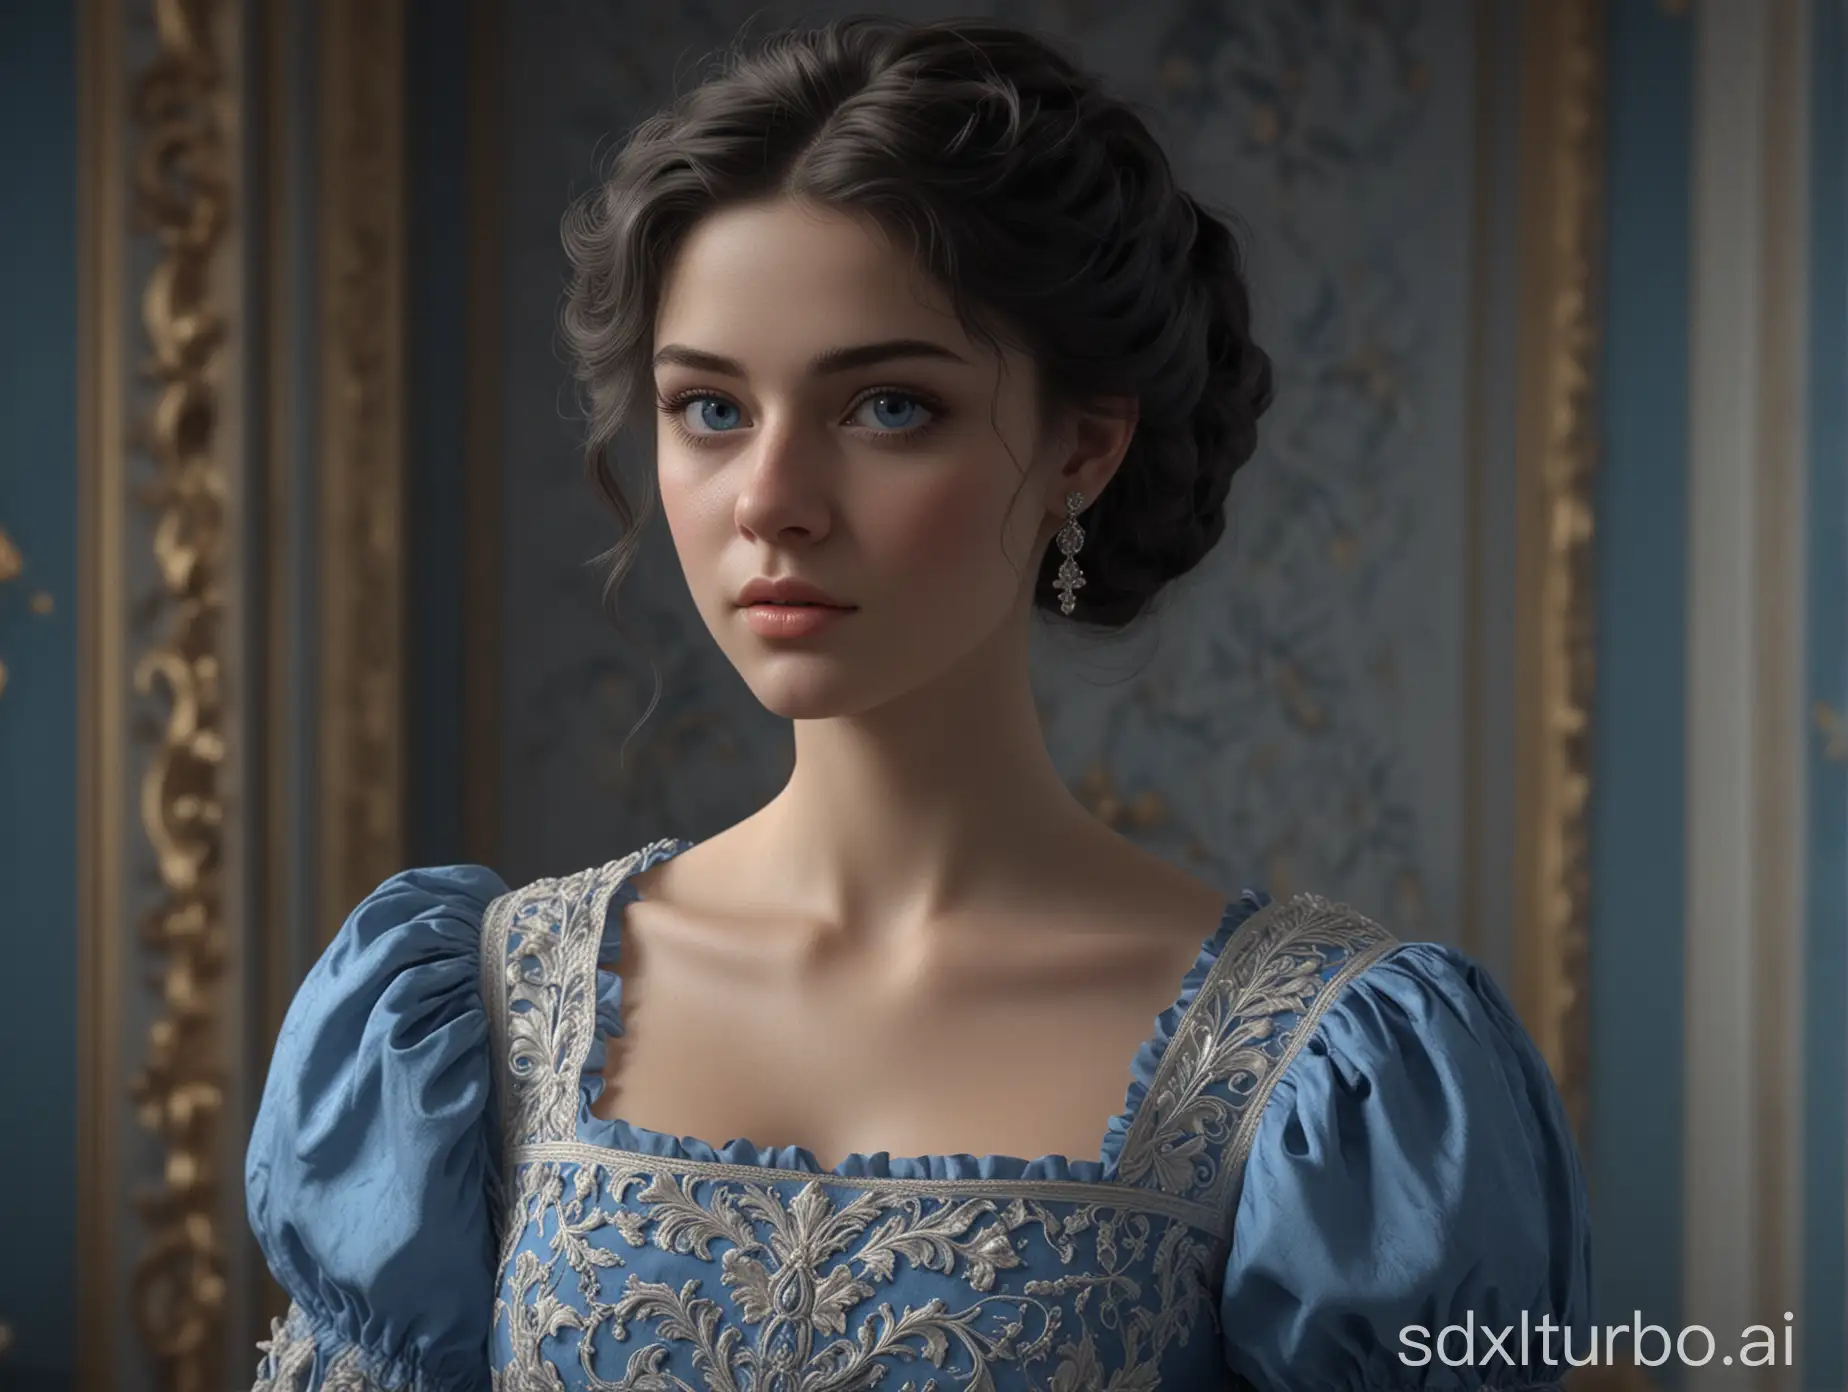 Stunning-23YearOld-Woman-with-Intricate-Louis-XIV-Era-Dress-and-Bright-Blue-Eyes-Photorealistic-Concept-Art-Masterpiece